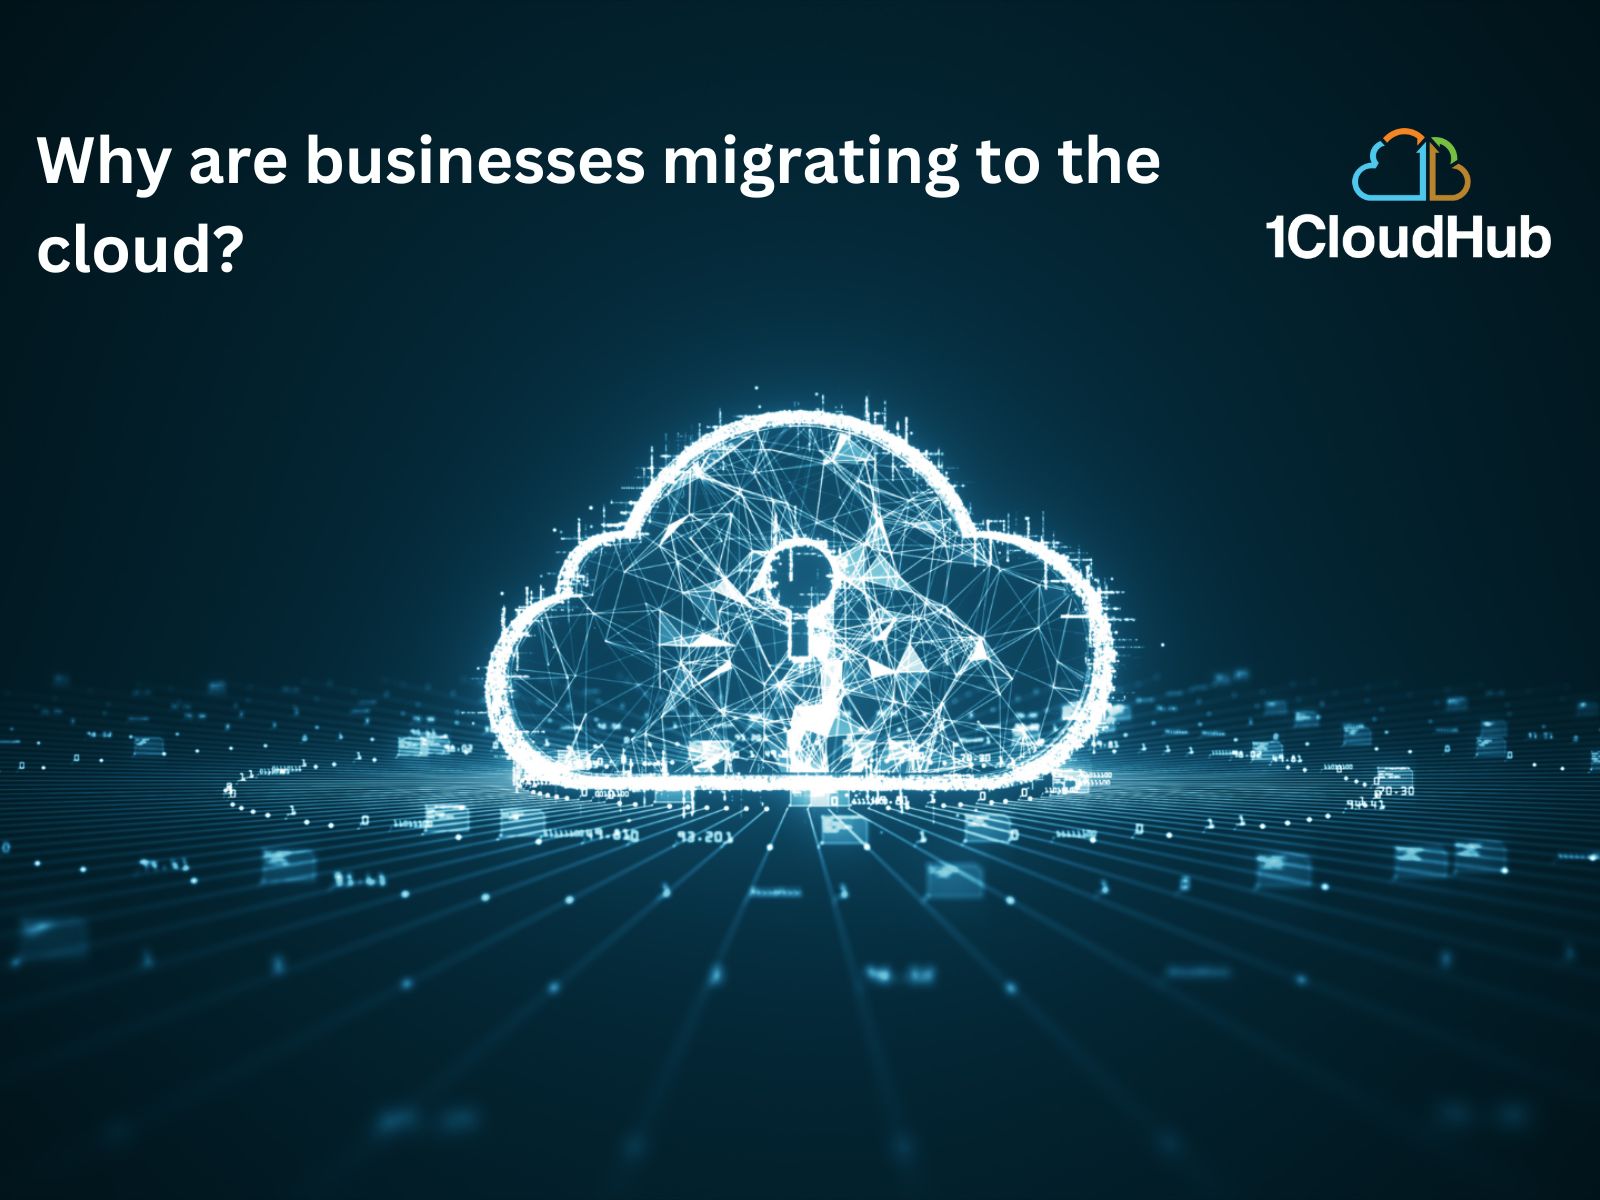 Why are businesses migrating to the cloud?